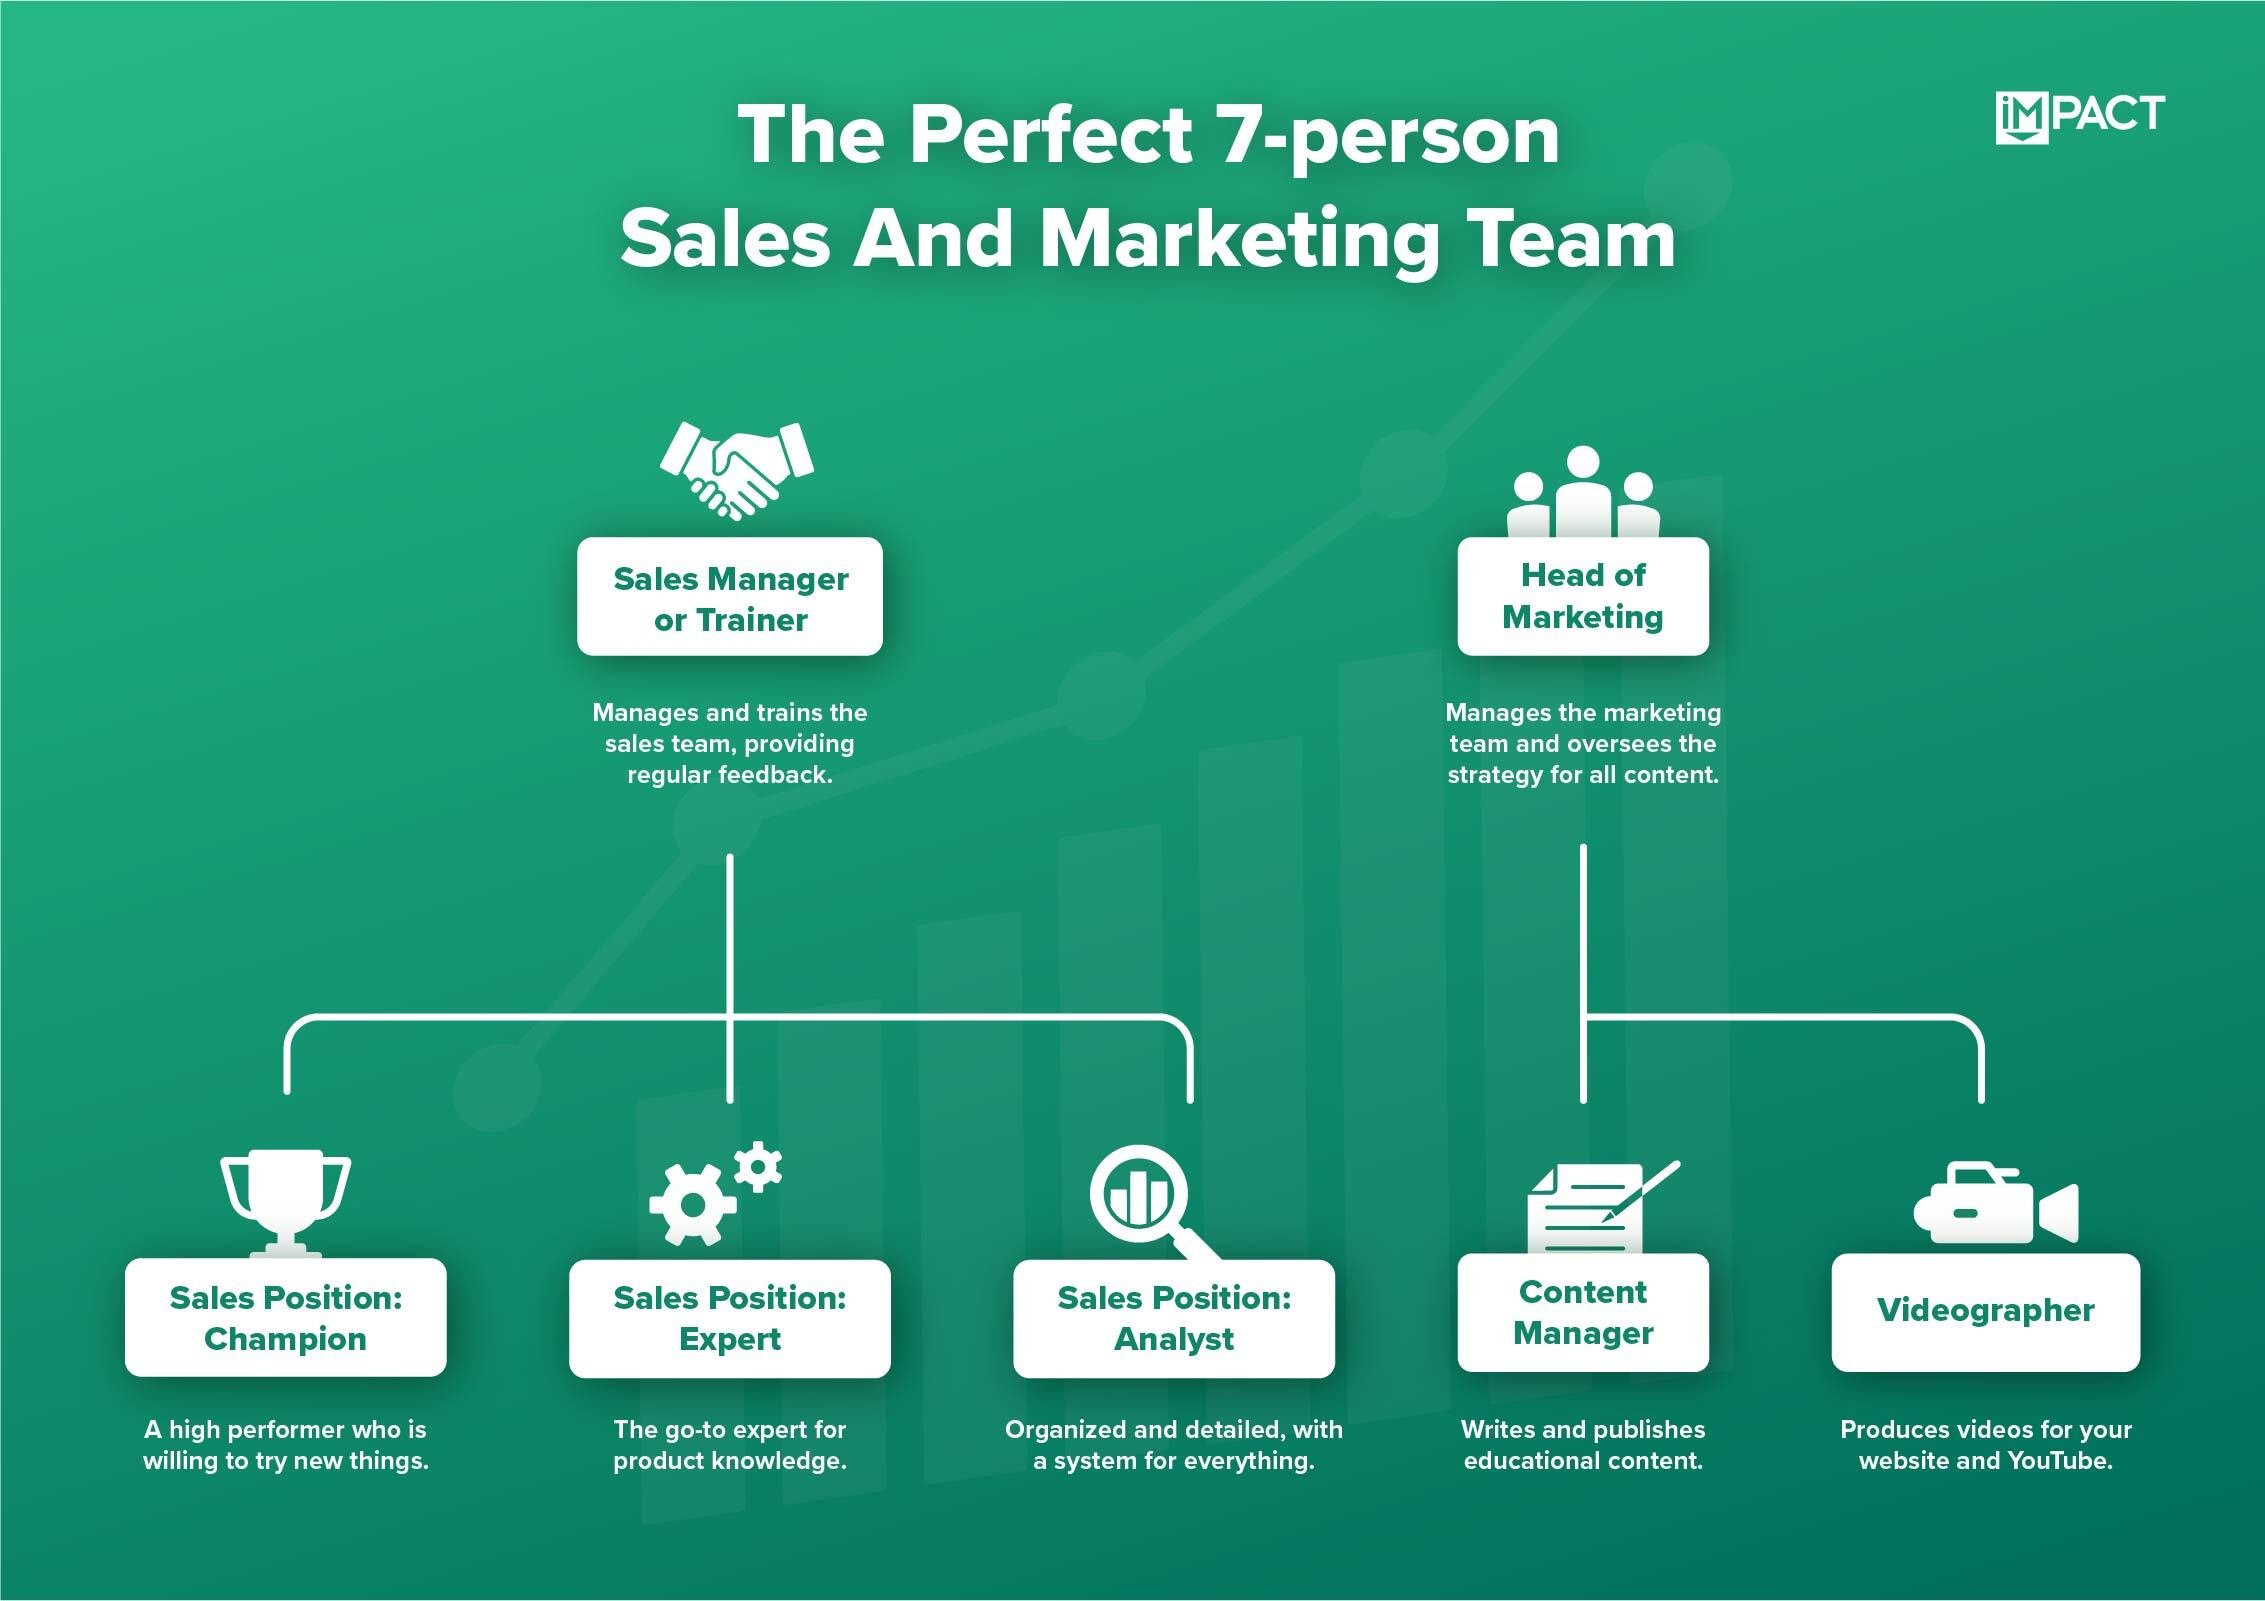 A chart describing a perfect sales and marketing team structure.